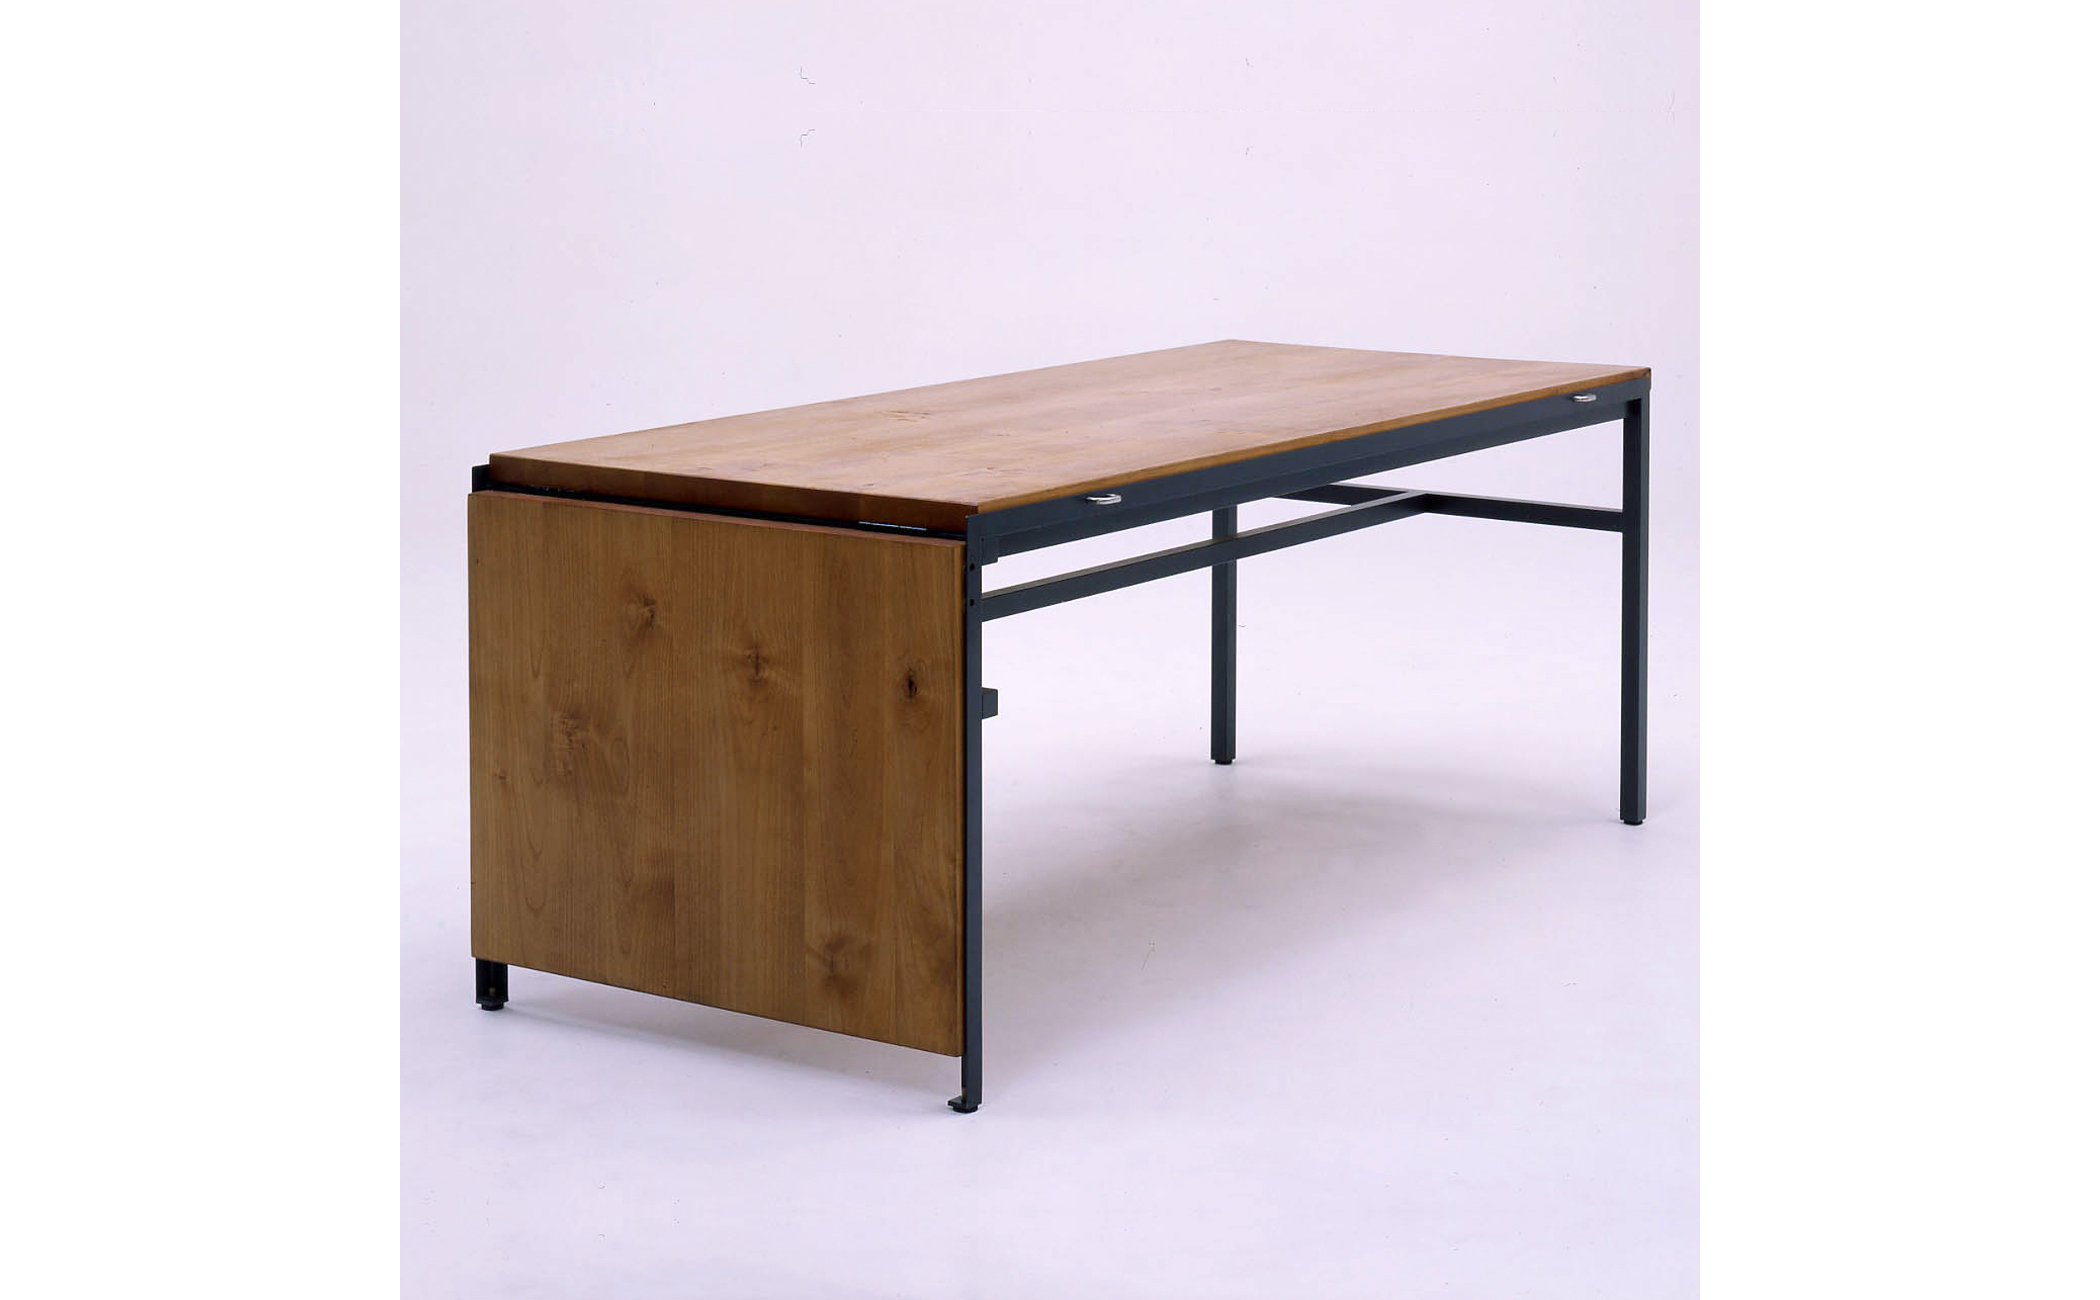 Work Table - graf | decorative mode no.3 design products Inc.